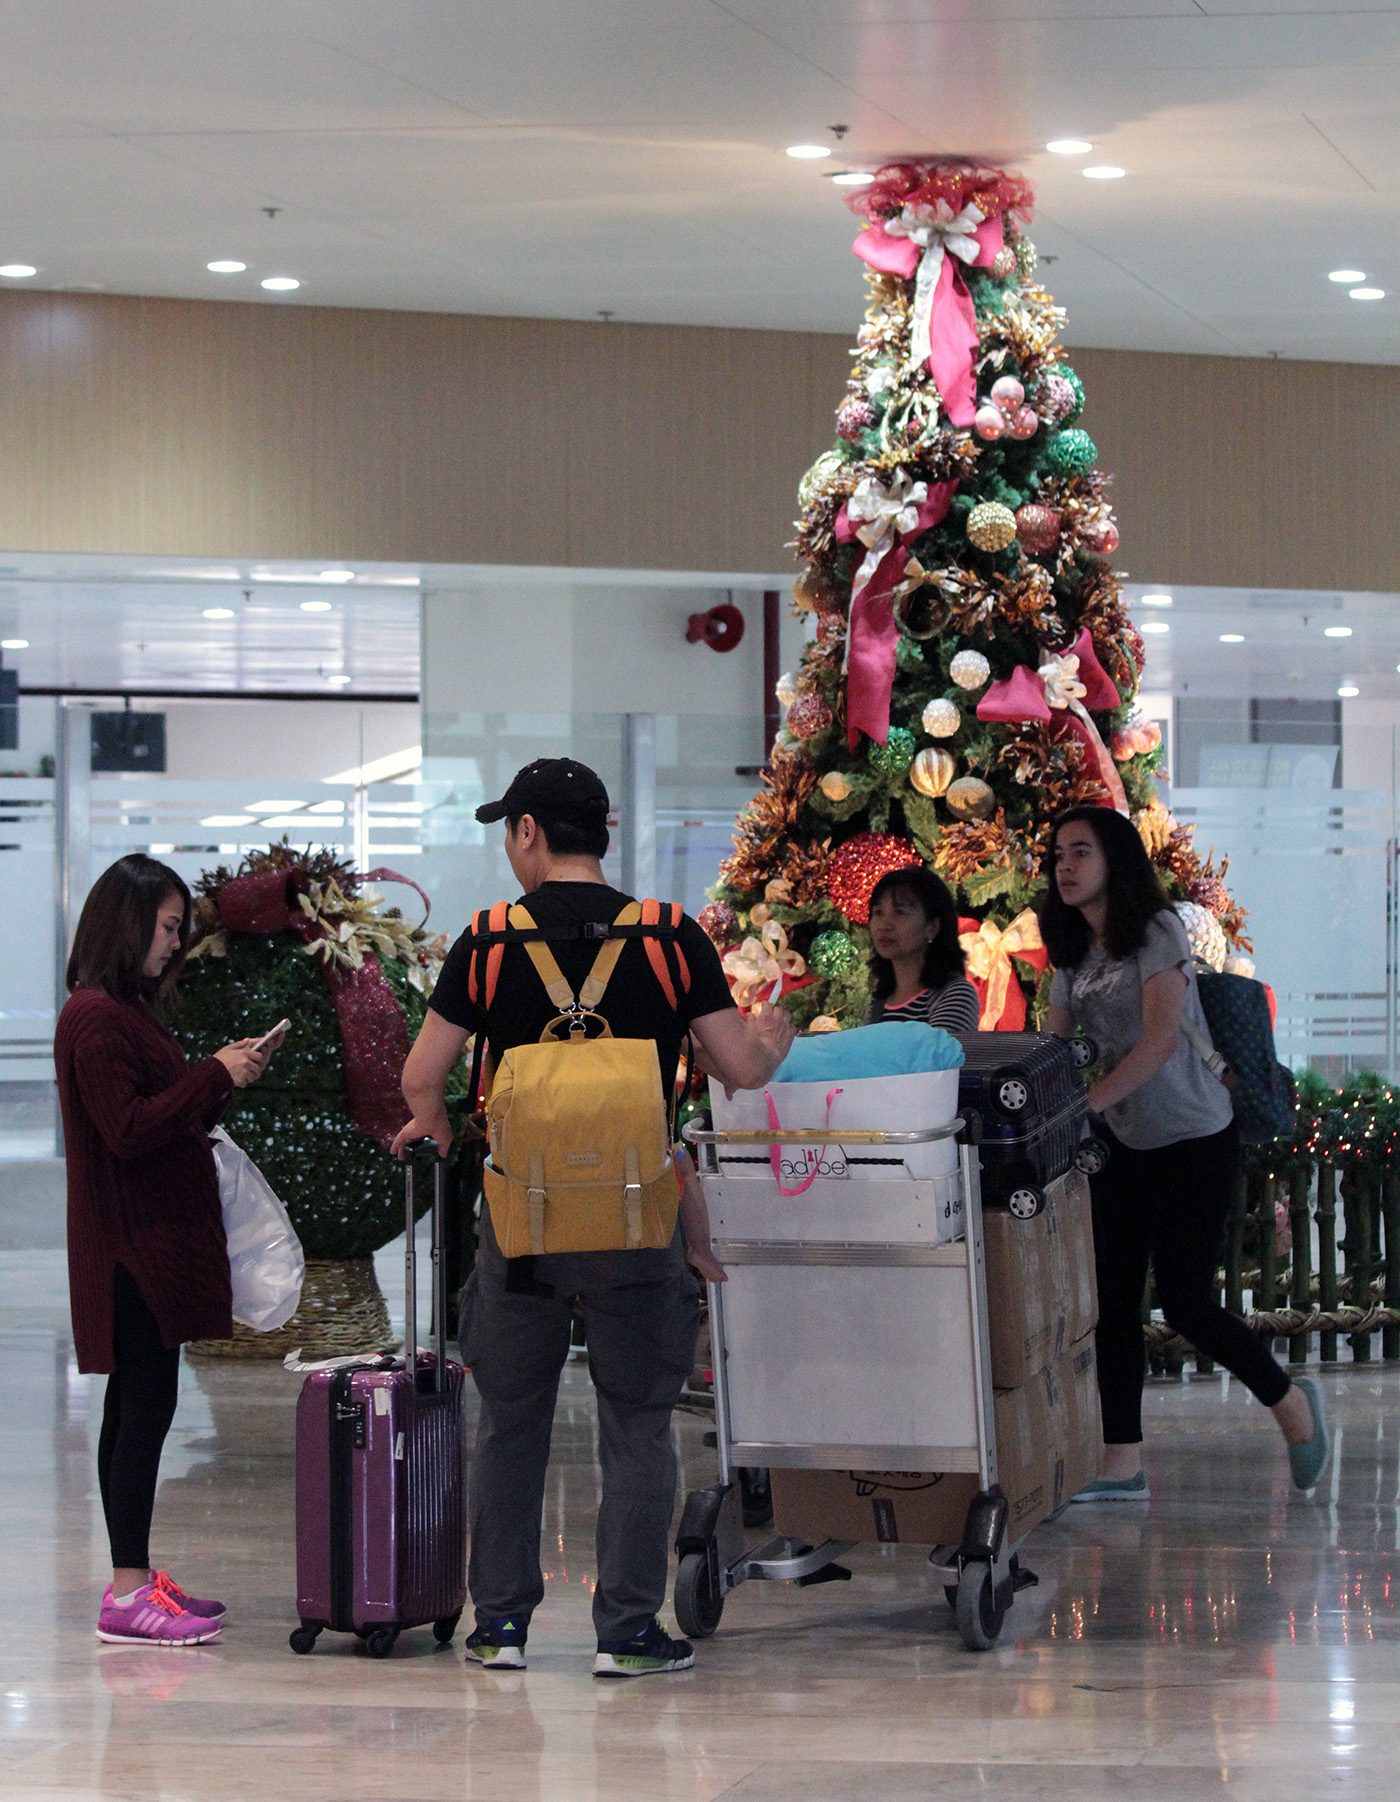 PHOTO. Looks like these passengers will have their souvenir photo taken, with the giant Christmas tree as background. Photo by Jedwin Llobrera/Rappler   